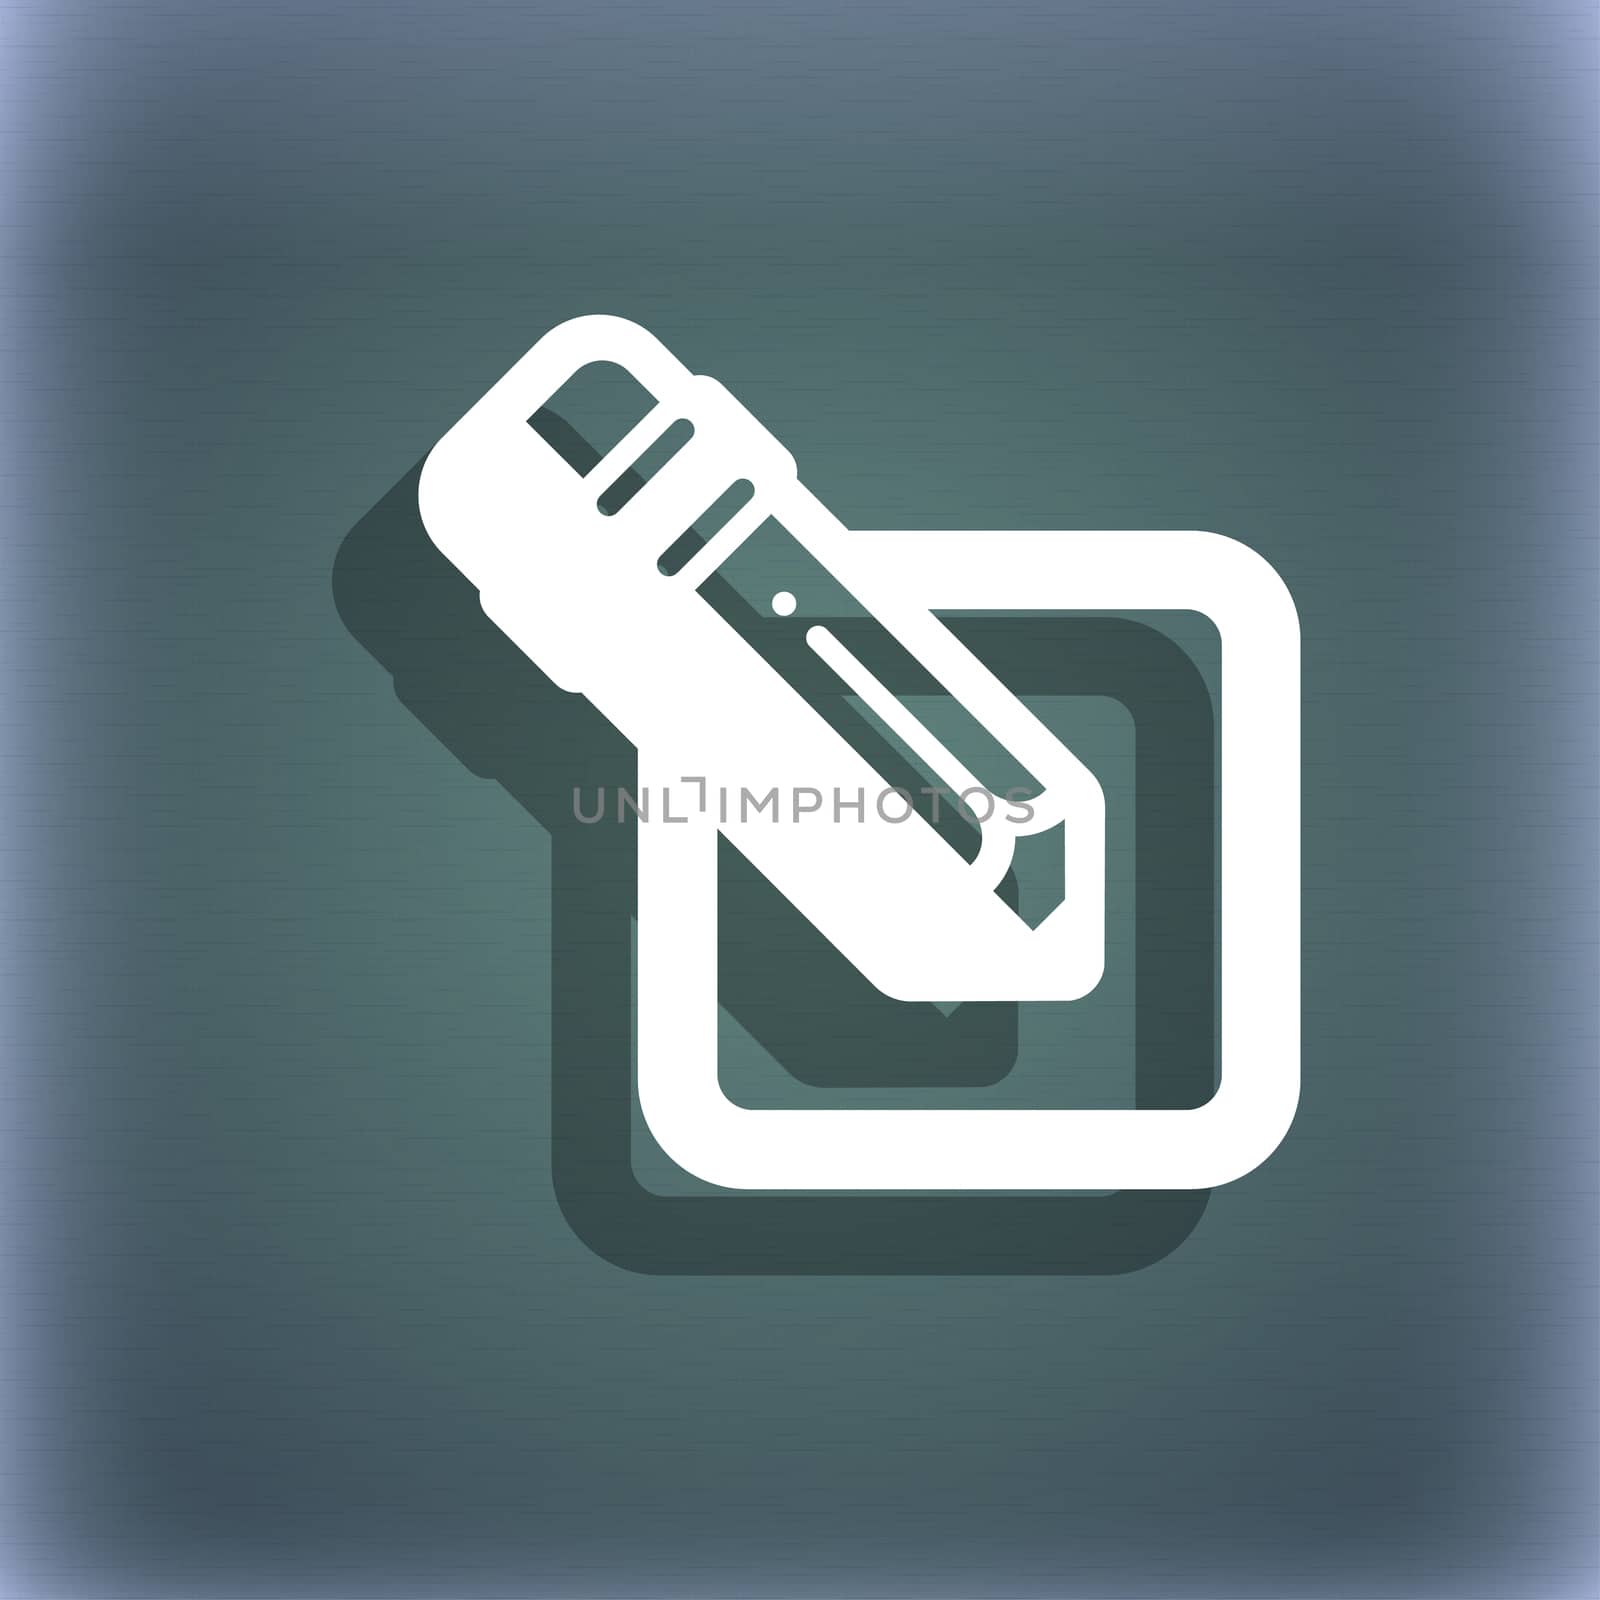 pencil icon symbol on the blue-green abstract background with shadow and space for your text.  by serhii_lohvyniuk